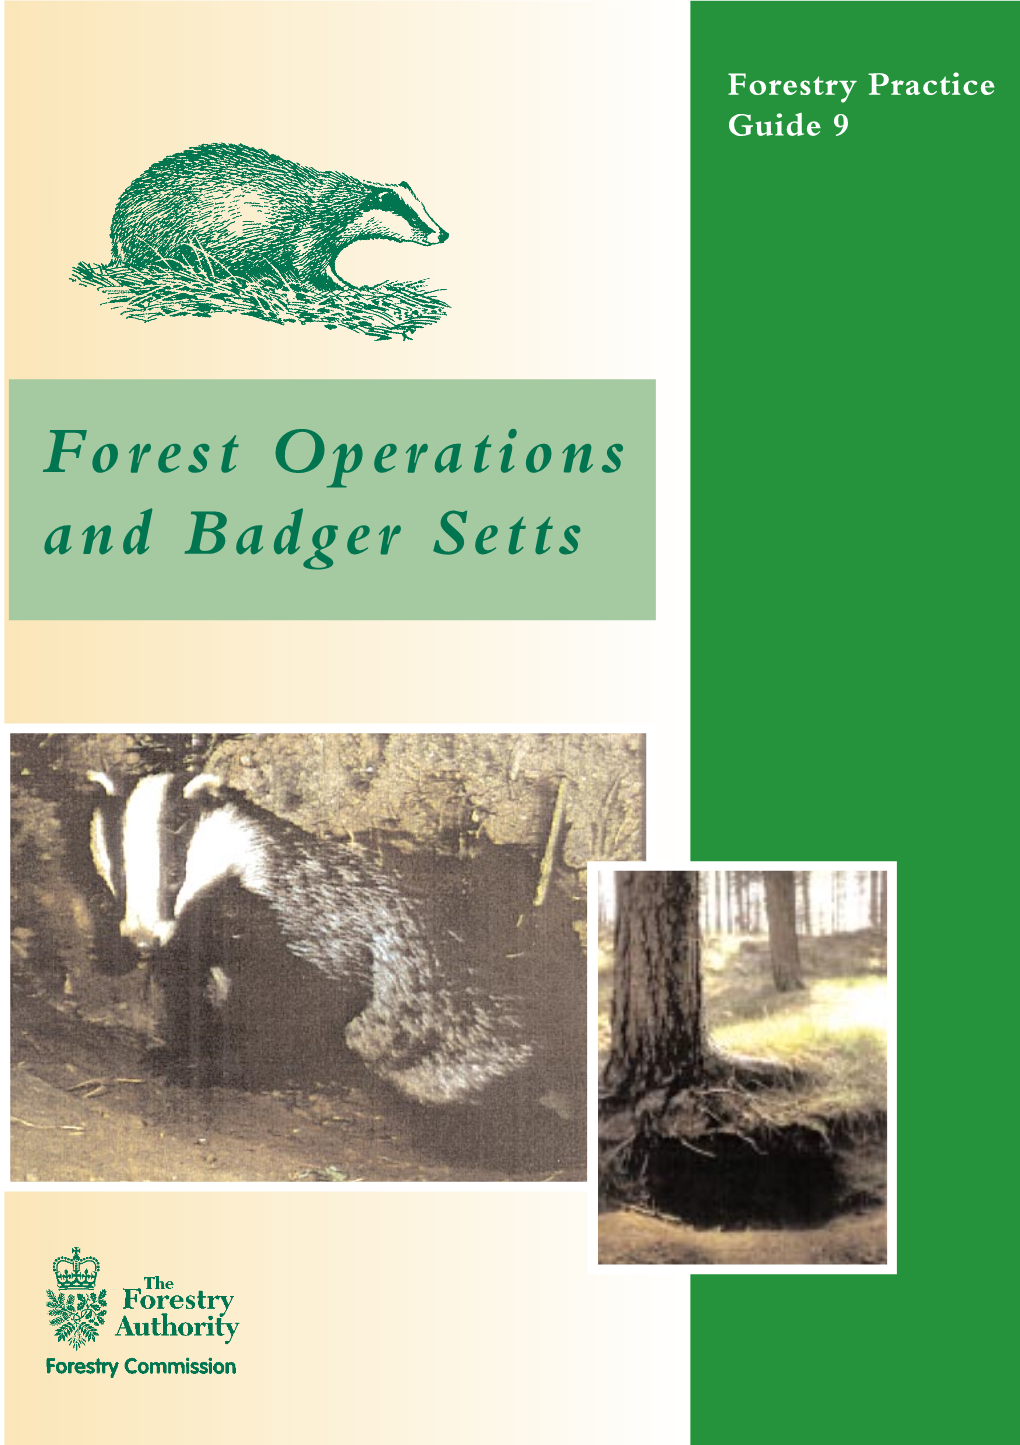 Forest Operations and Badger Setts Forestry Practice Guide 9